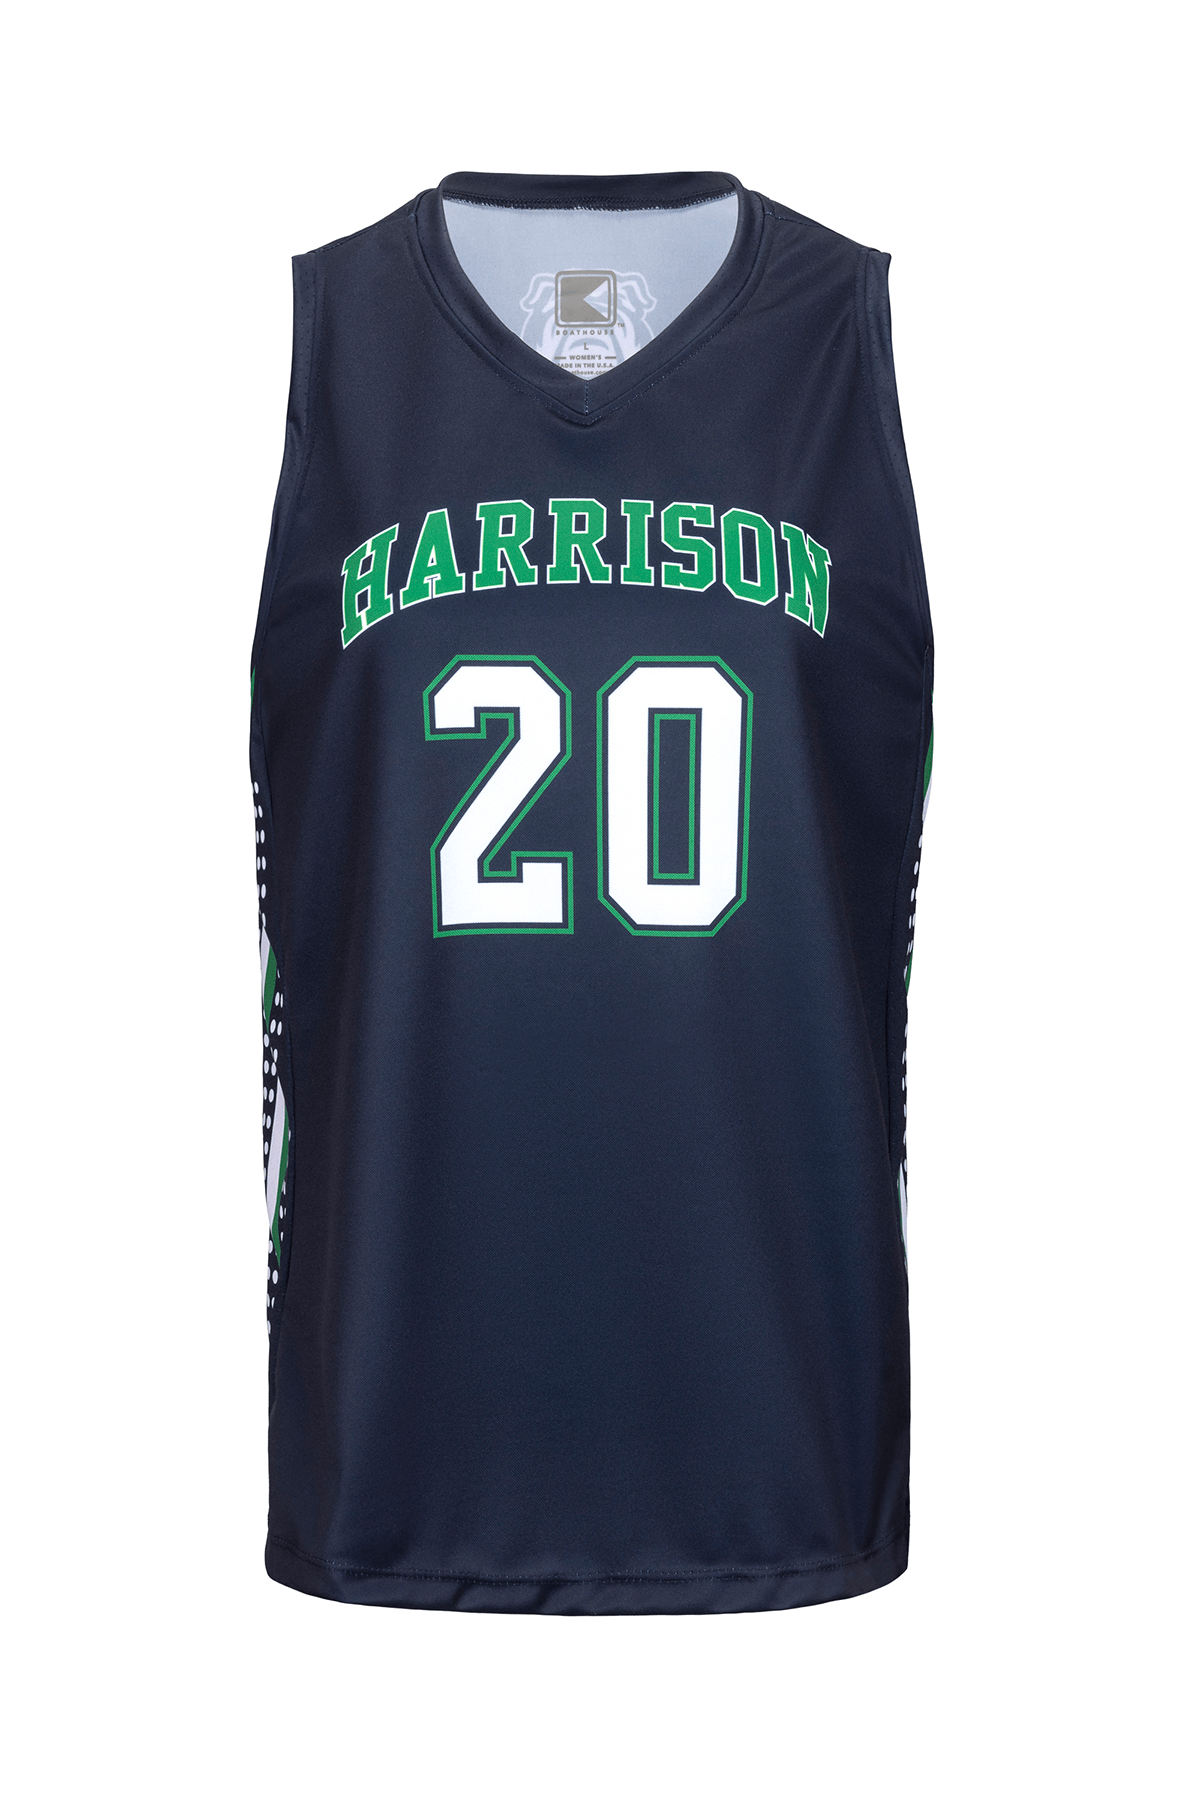 Wholesale Best Price High Quality Sublimation Printing New Design Custom  Basketball Jersey